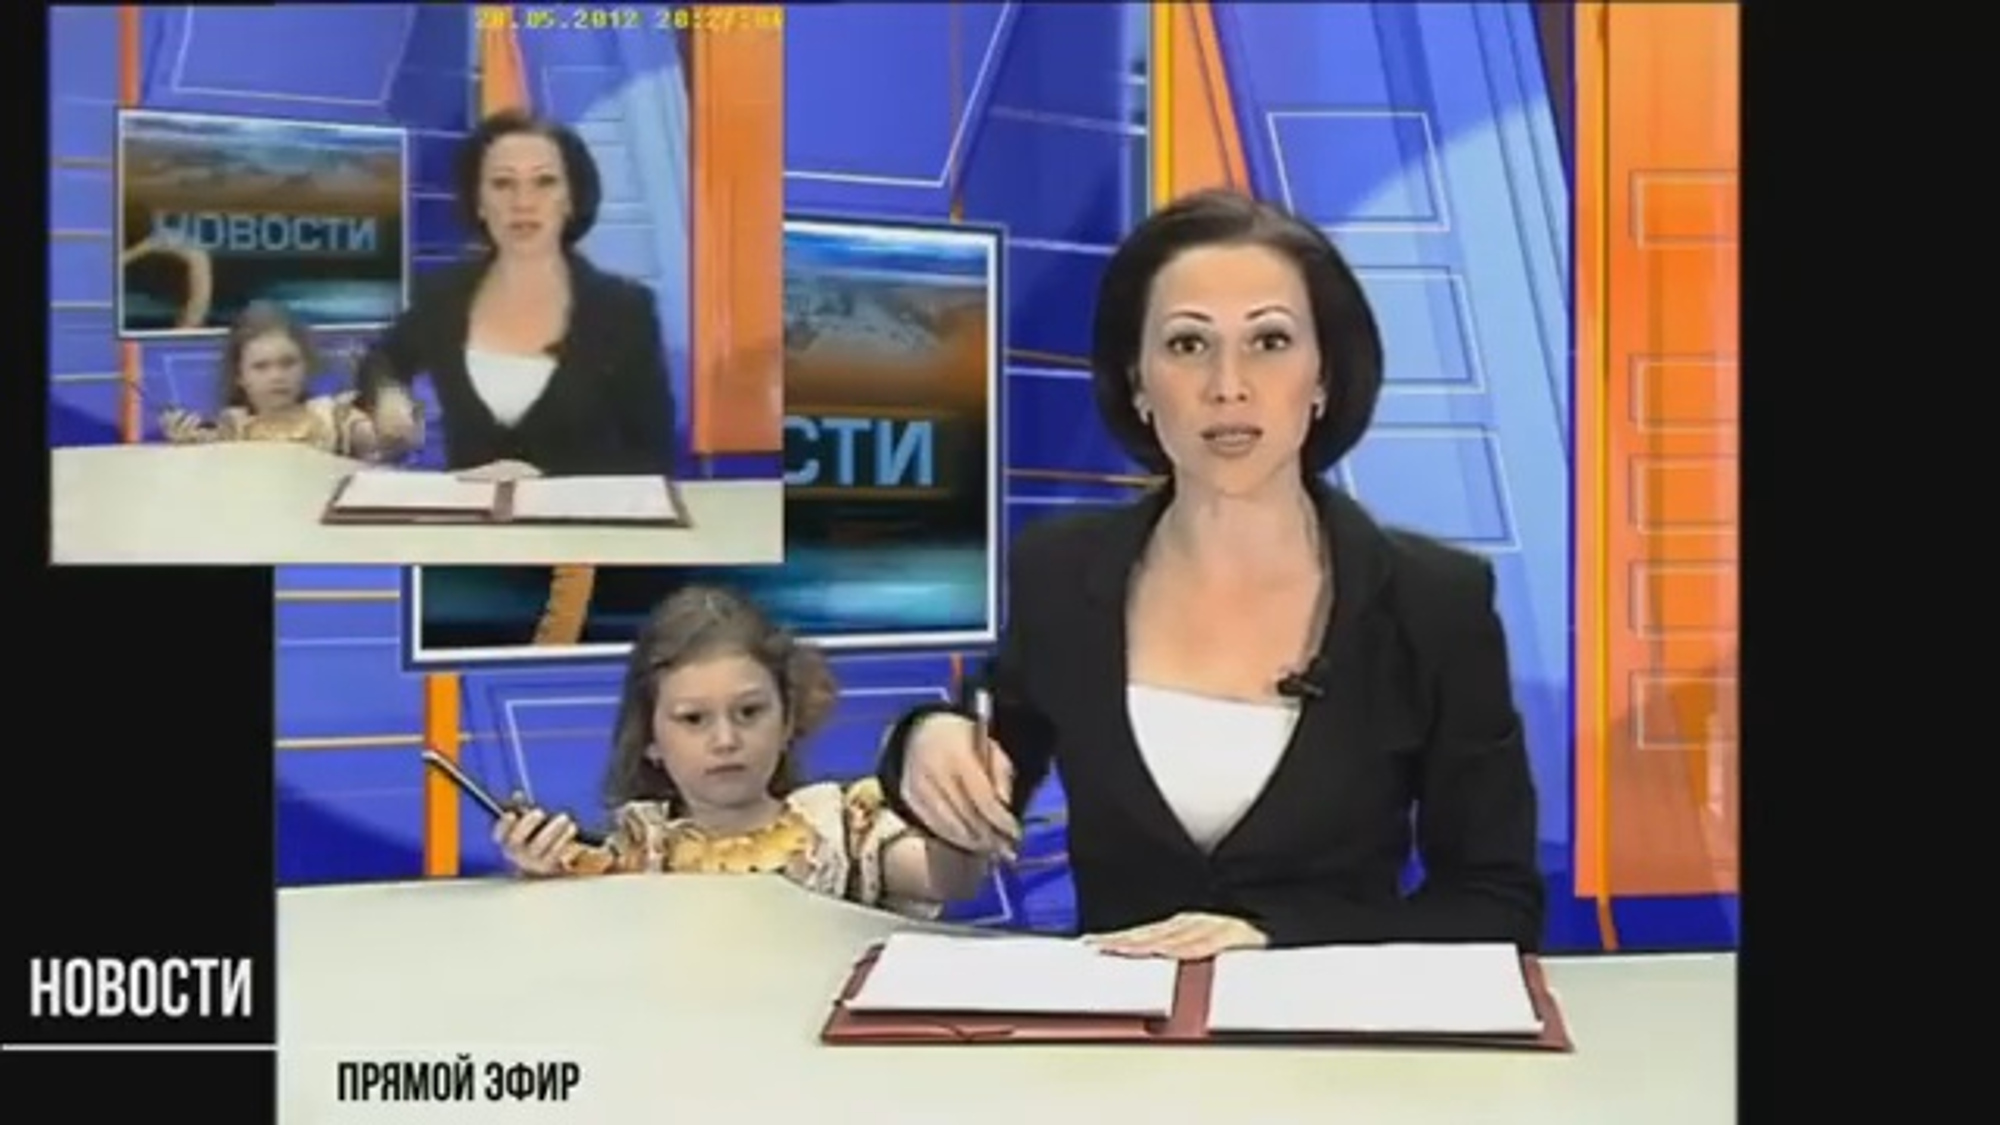 Read more about the article Girl Interrupts Mum Anchor Live On Air Over Phone SMS